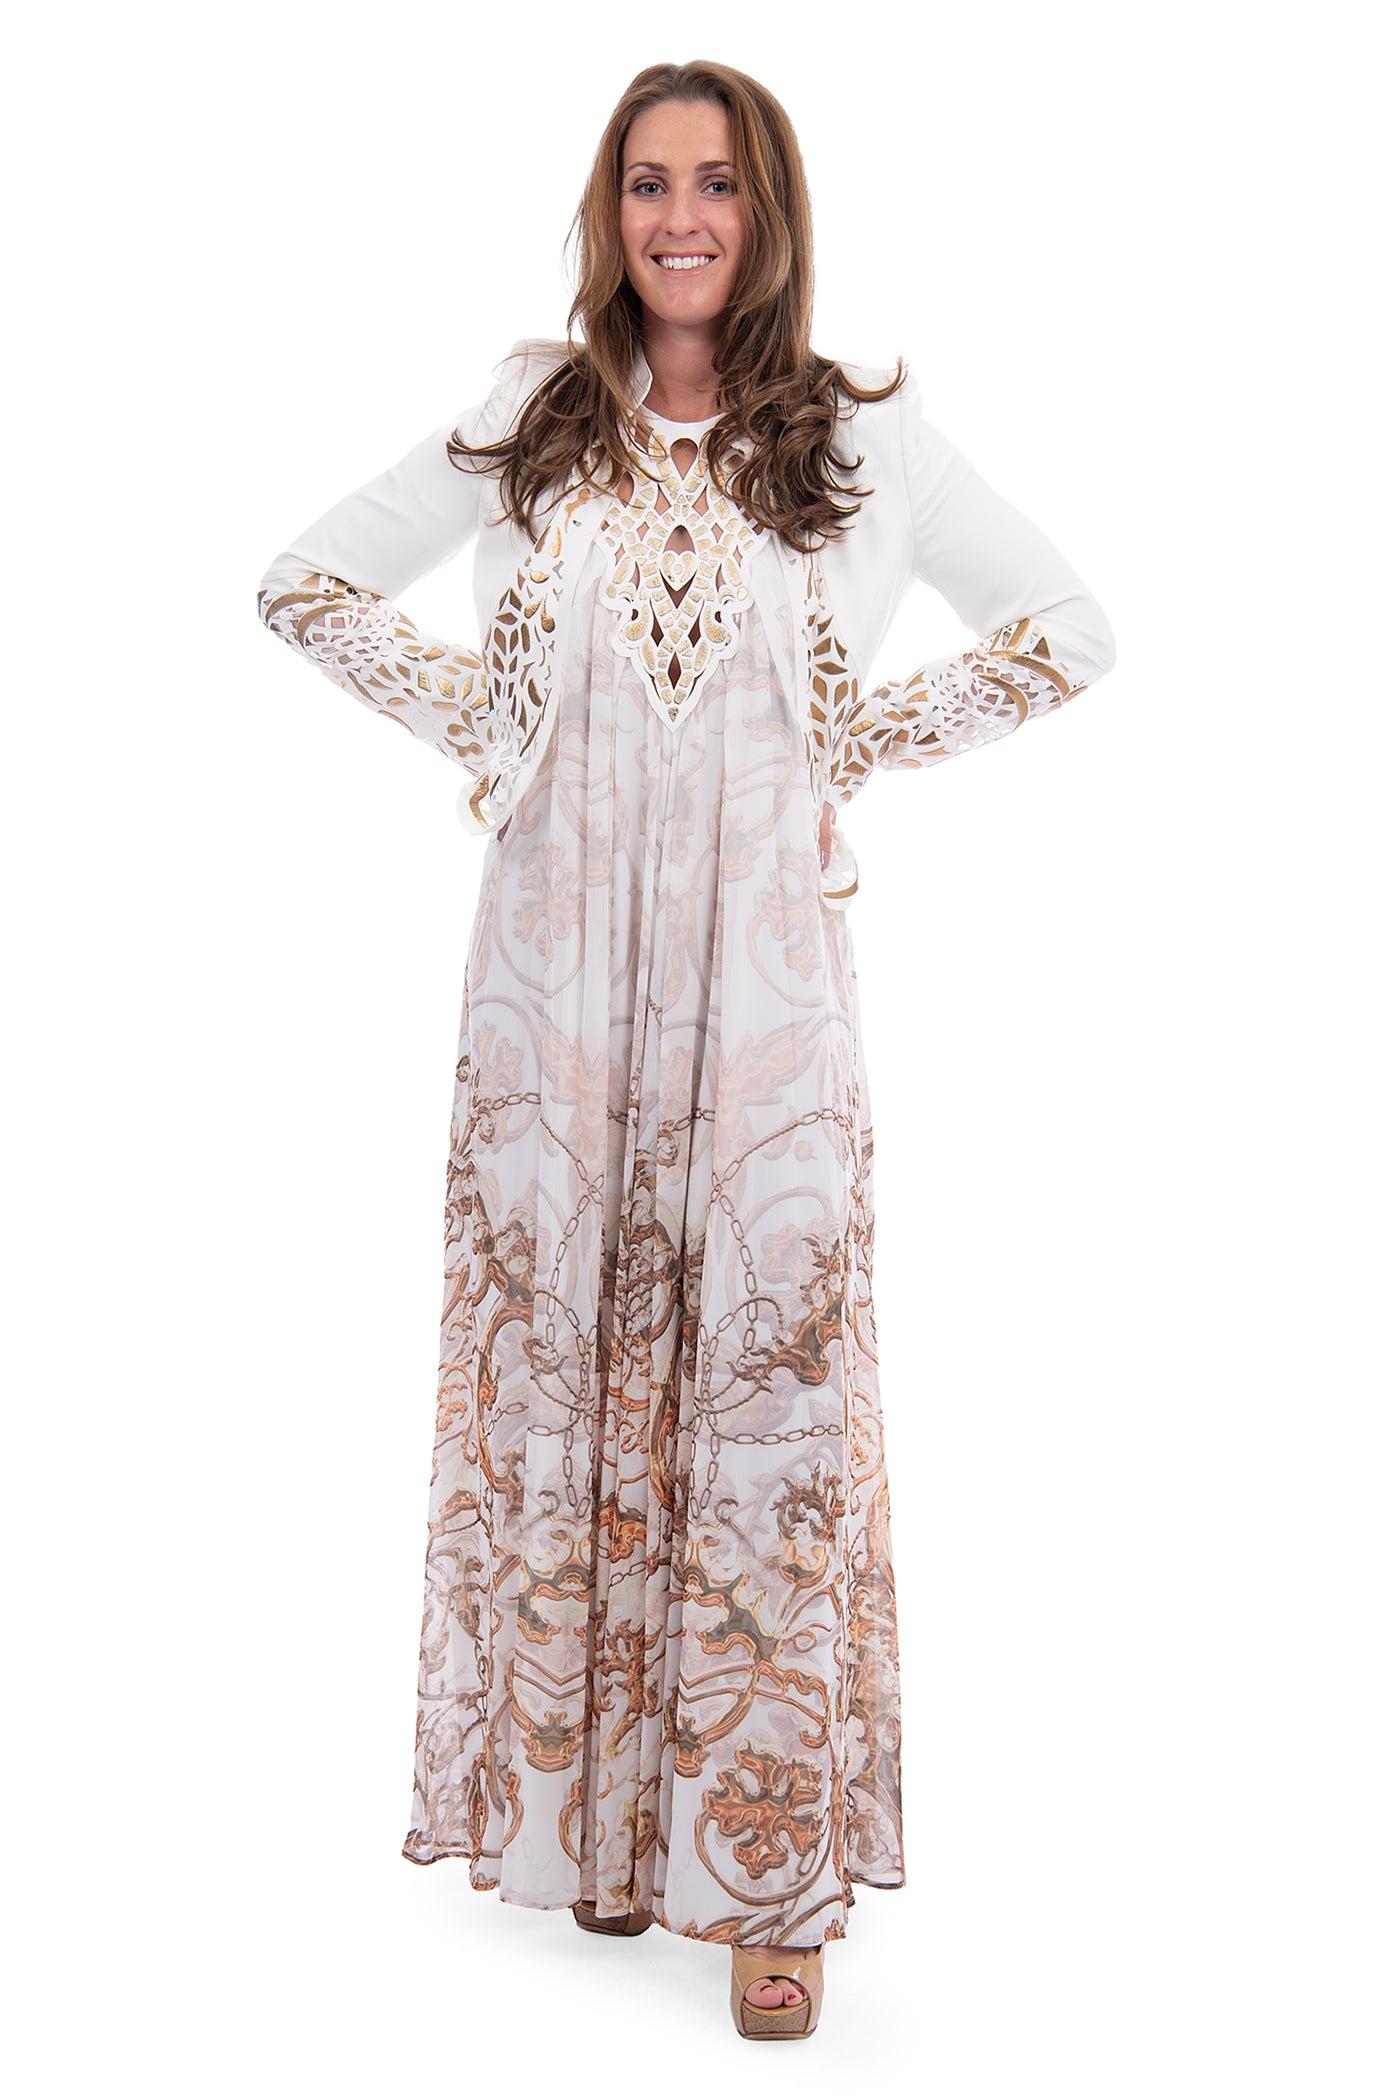 Baby 21  vintage cream and gold halter neck maxi dress + matching jacket